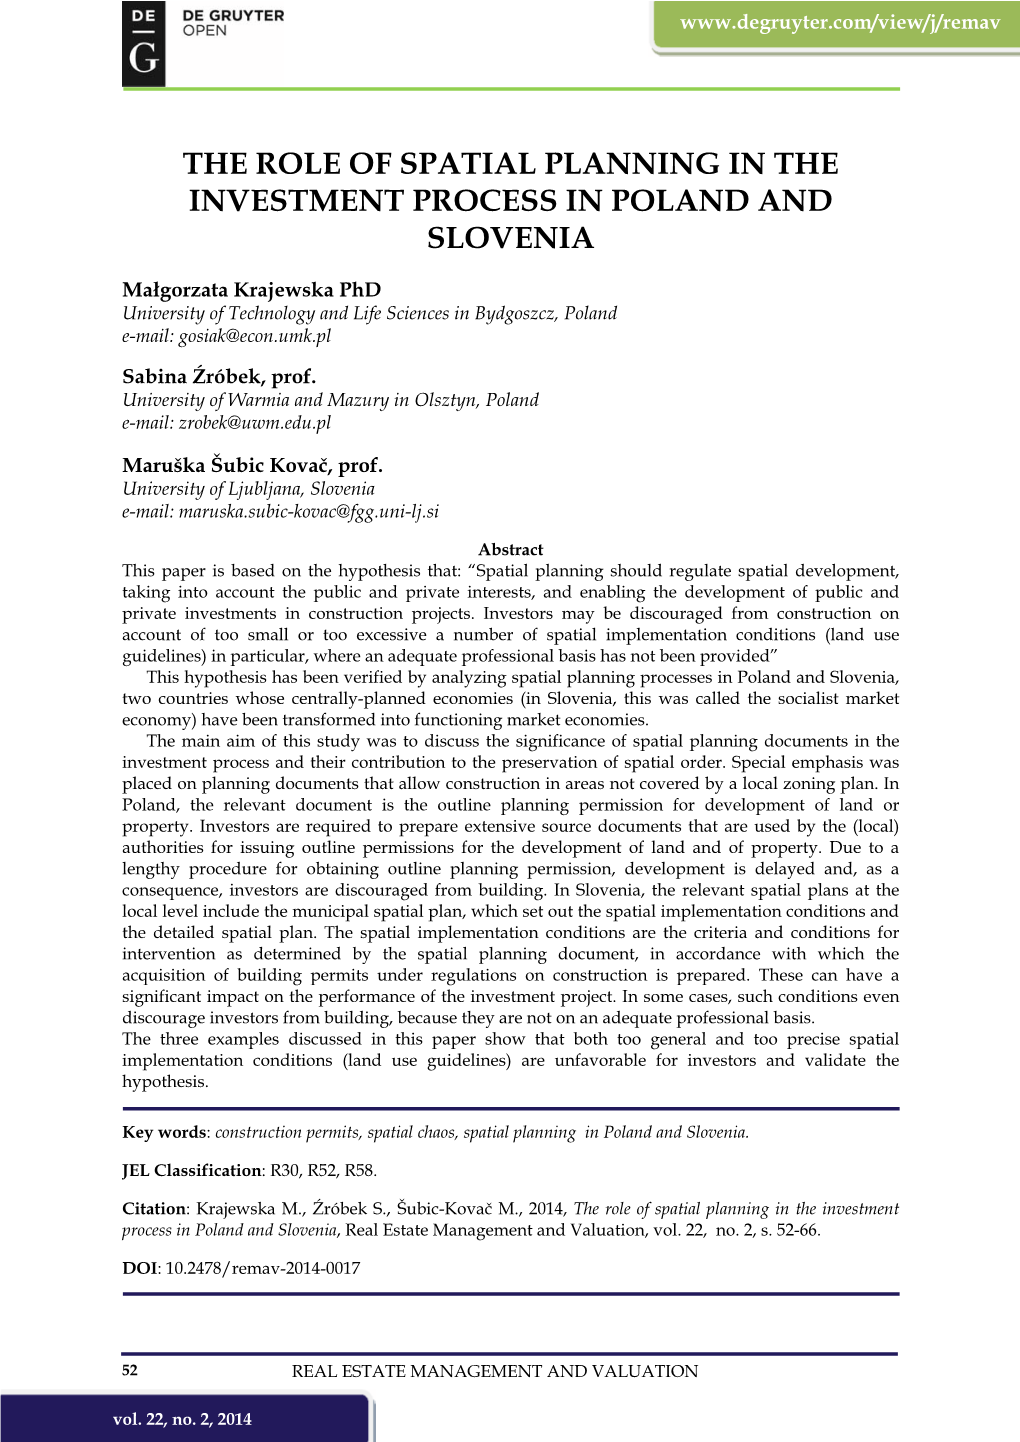 The Role of Spatial Planning in the Investment Process in Poland and Slovenia